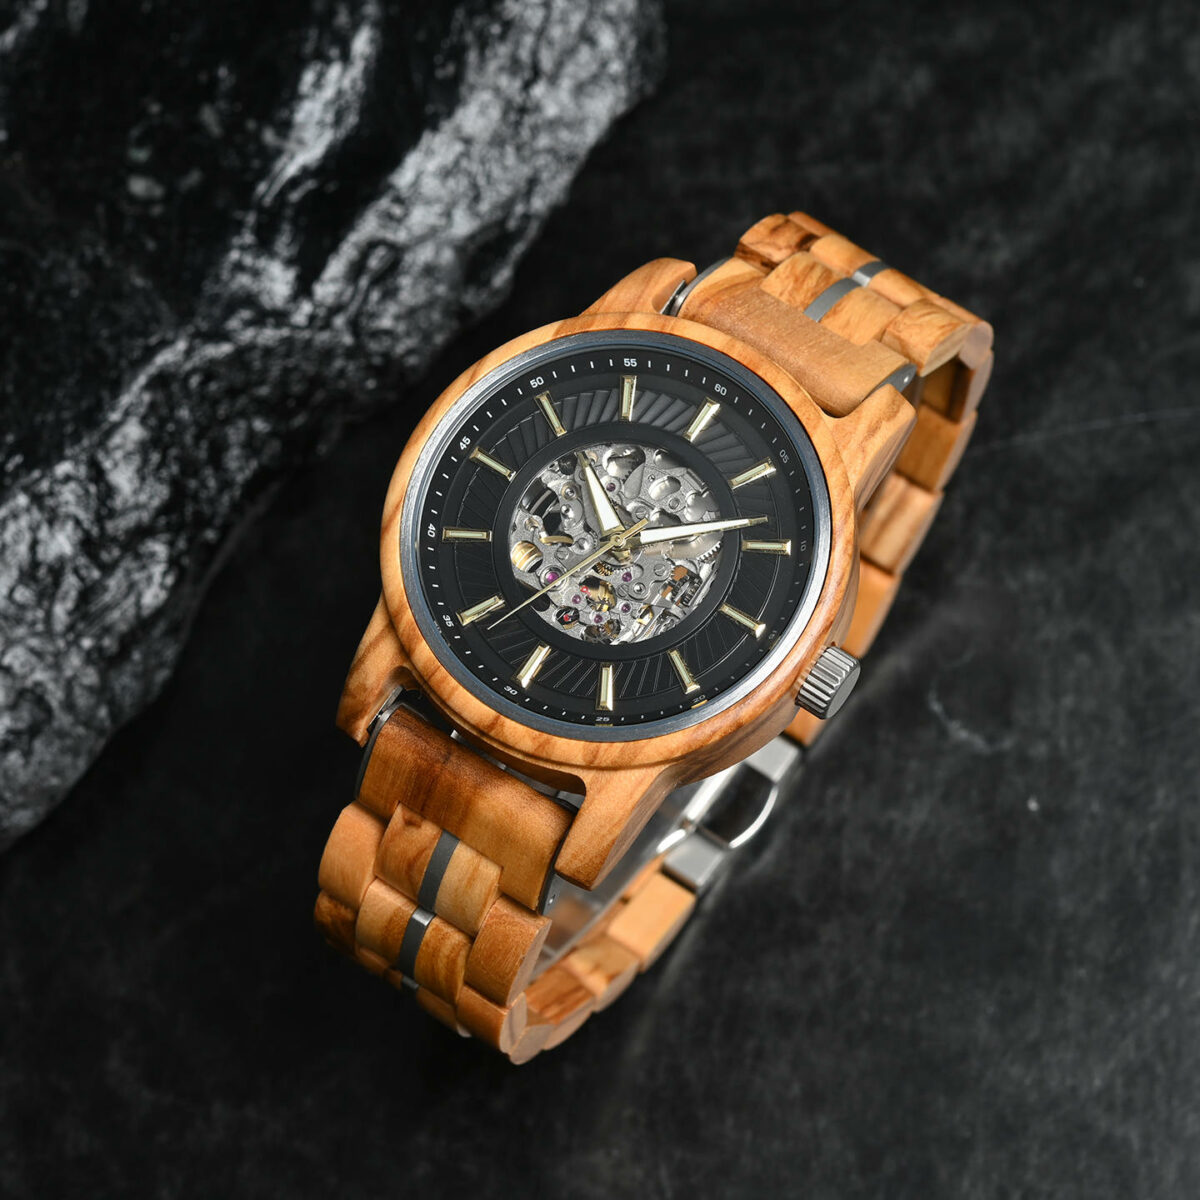 Automatic Mechanical Wooden Watch Handmade Olivewood Black Limited Edition Collection – Pilot (8)